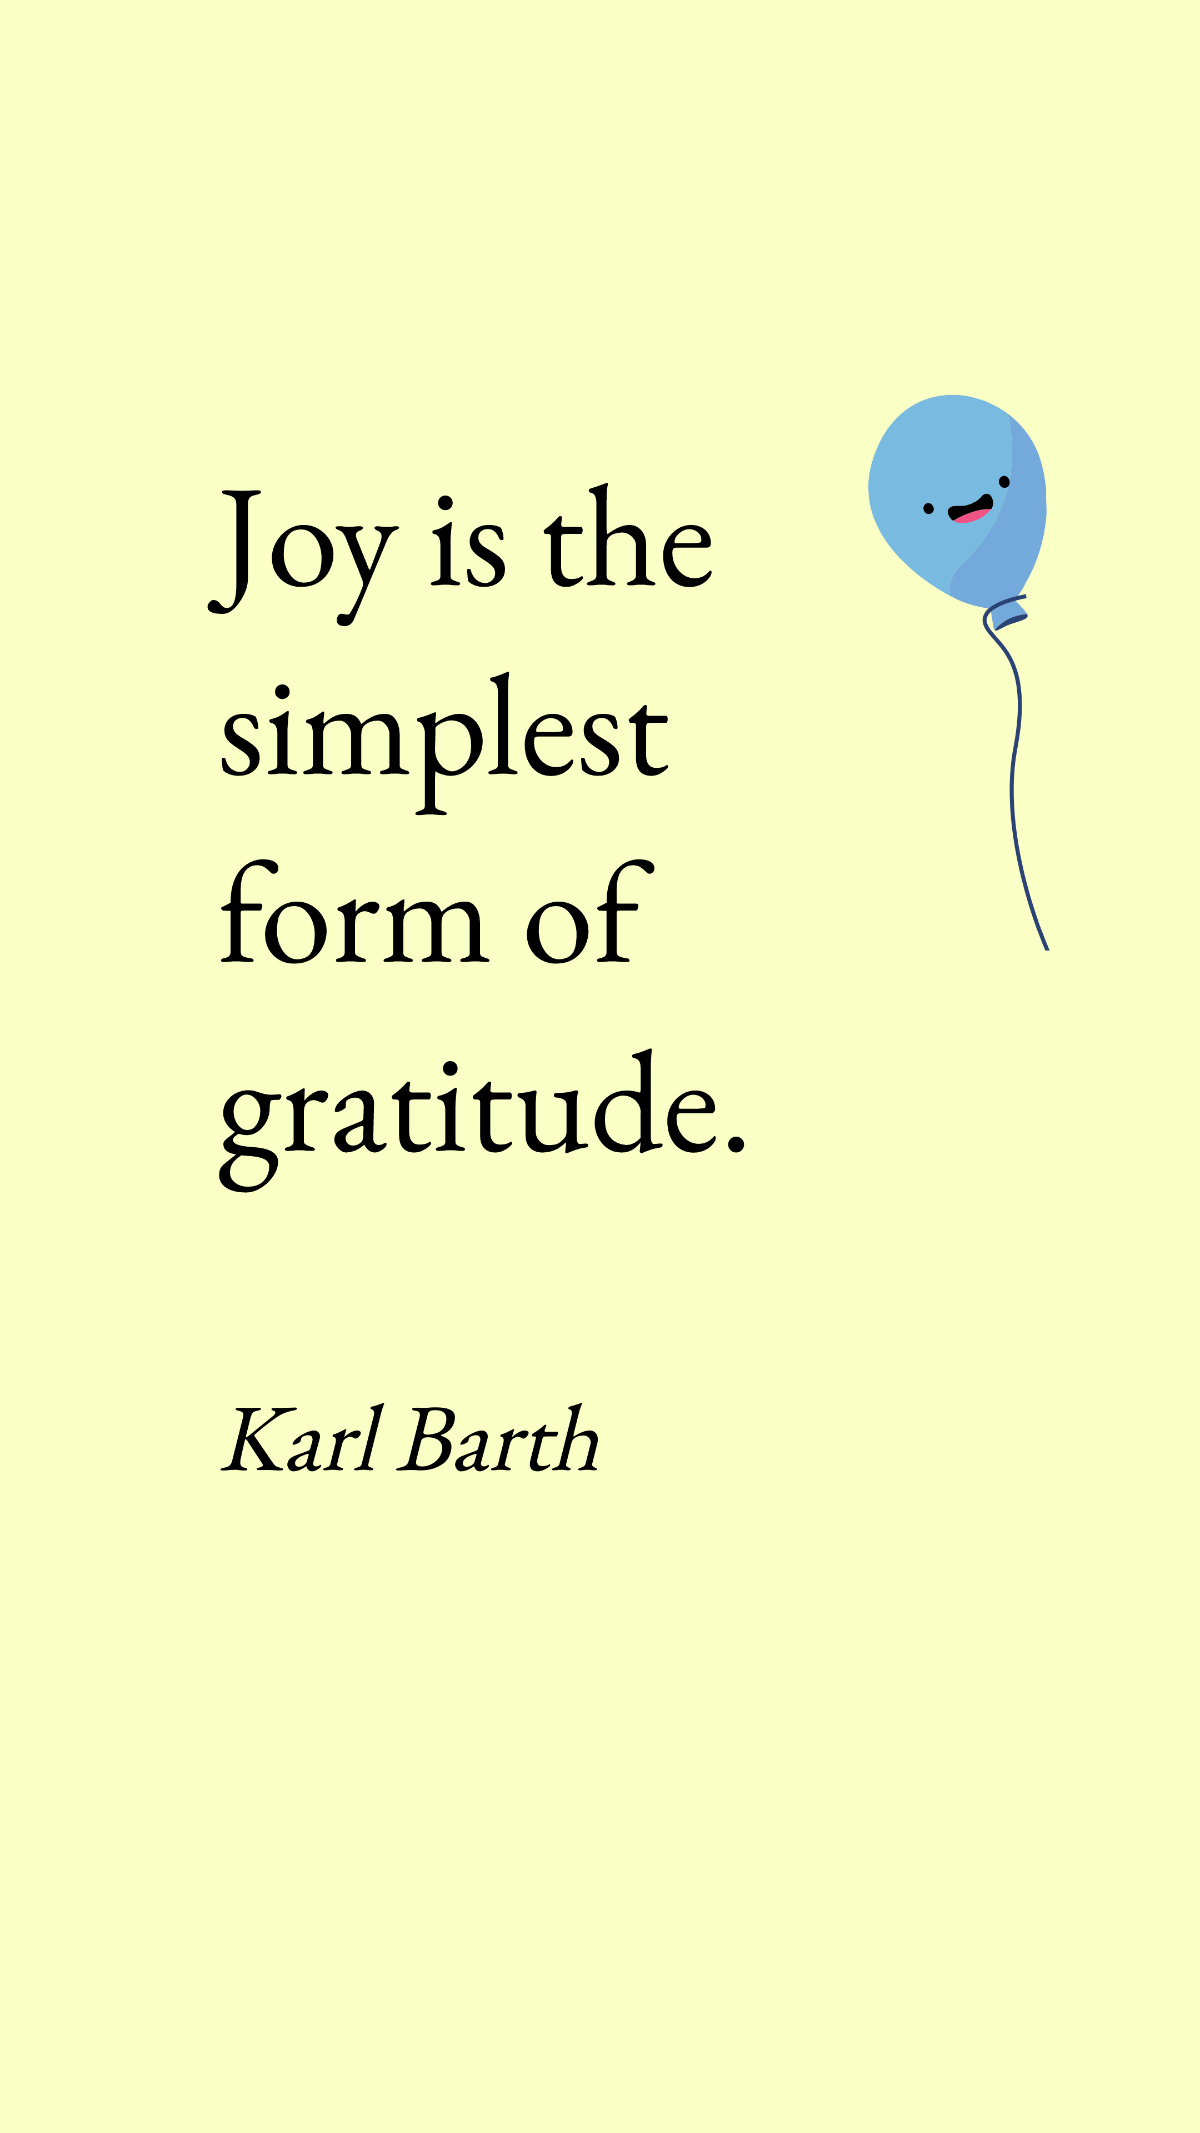 Karl Barth - Joy is the simplest form of gratitude.  Template